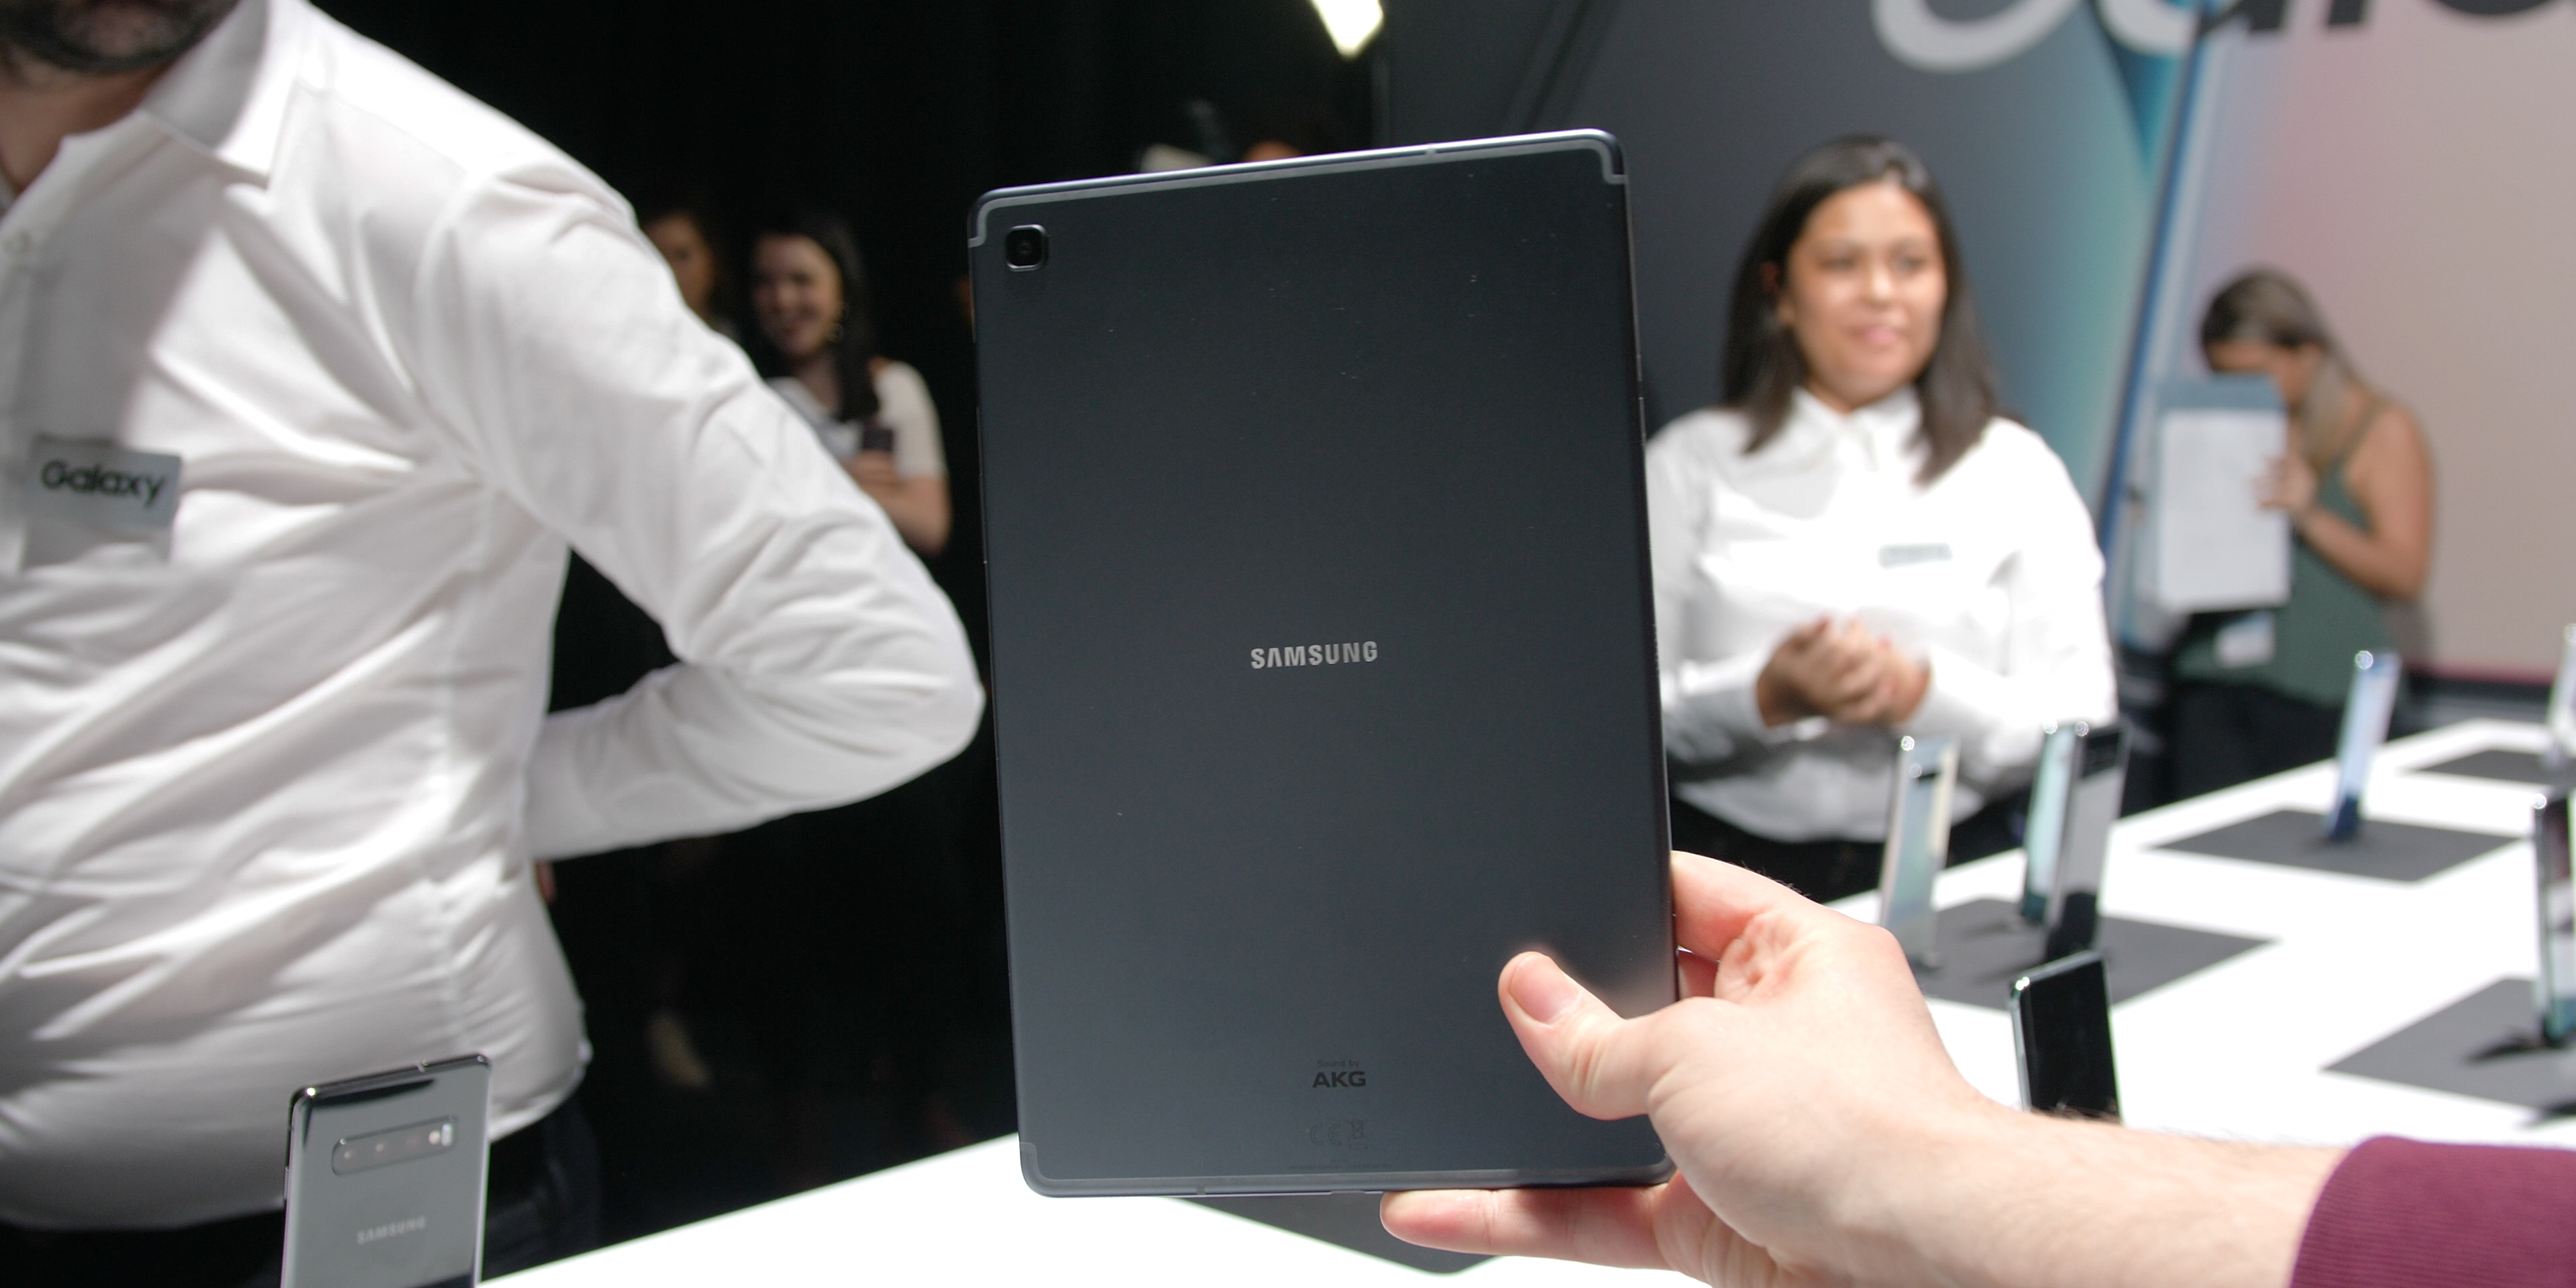 Android 10 rolling out for Samsung Galaxy Tab S4, Tab S5e - 9to5Google